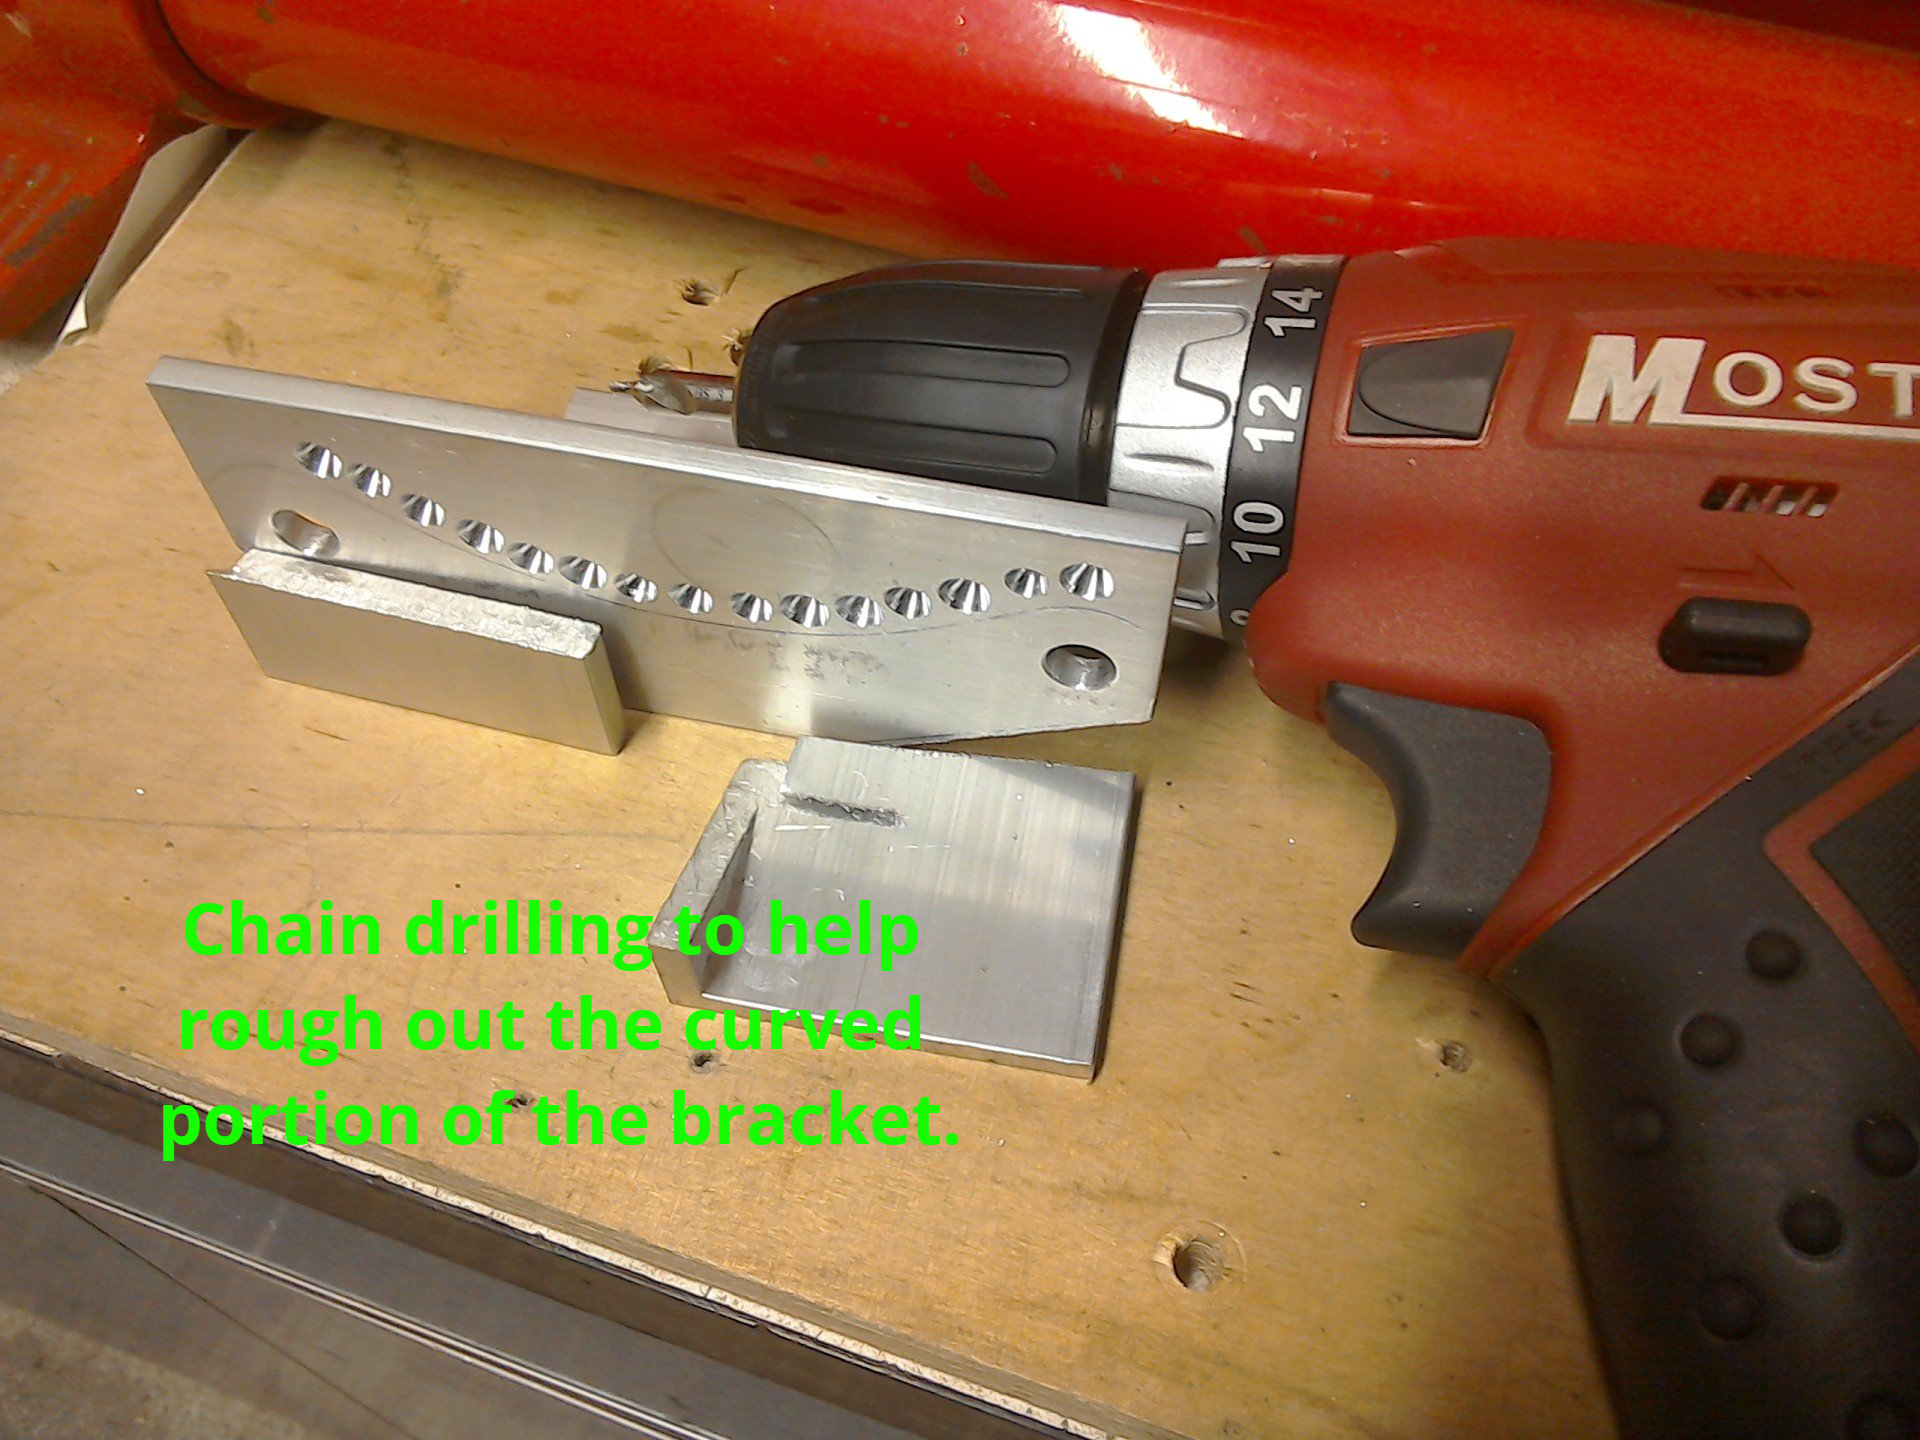 Chain drilling curved area of bracket